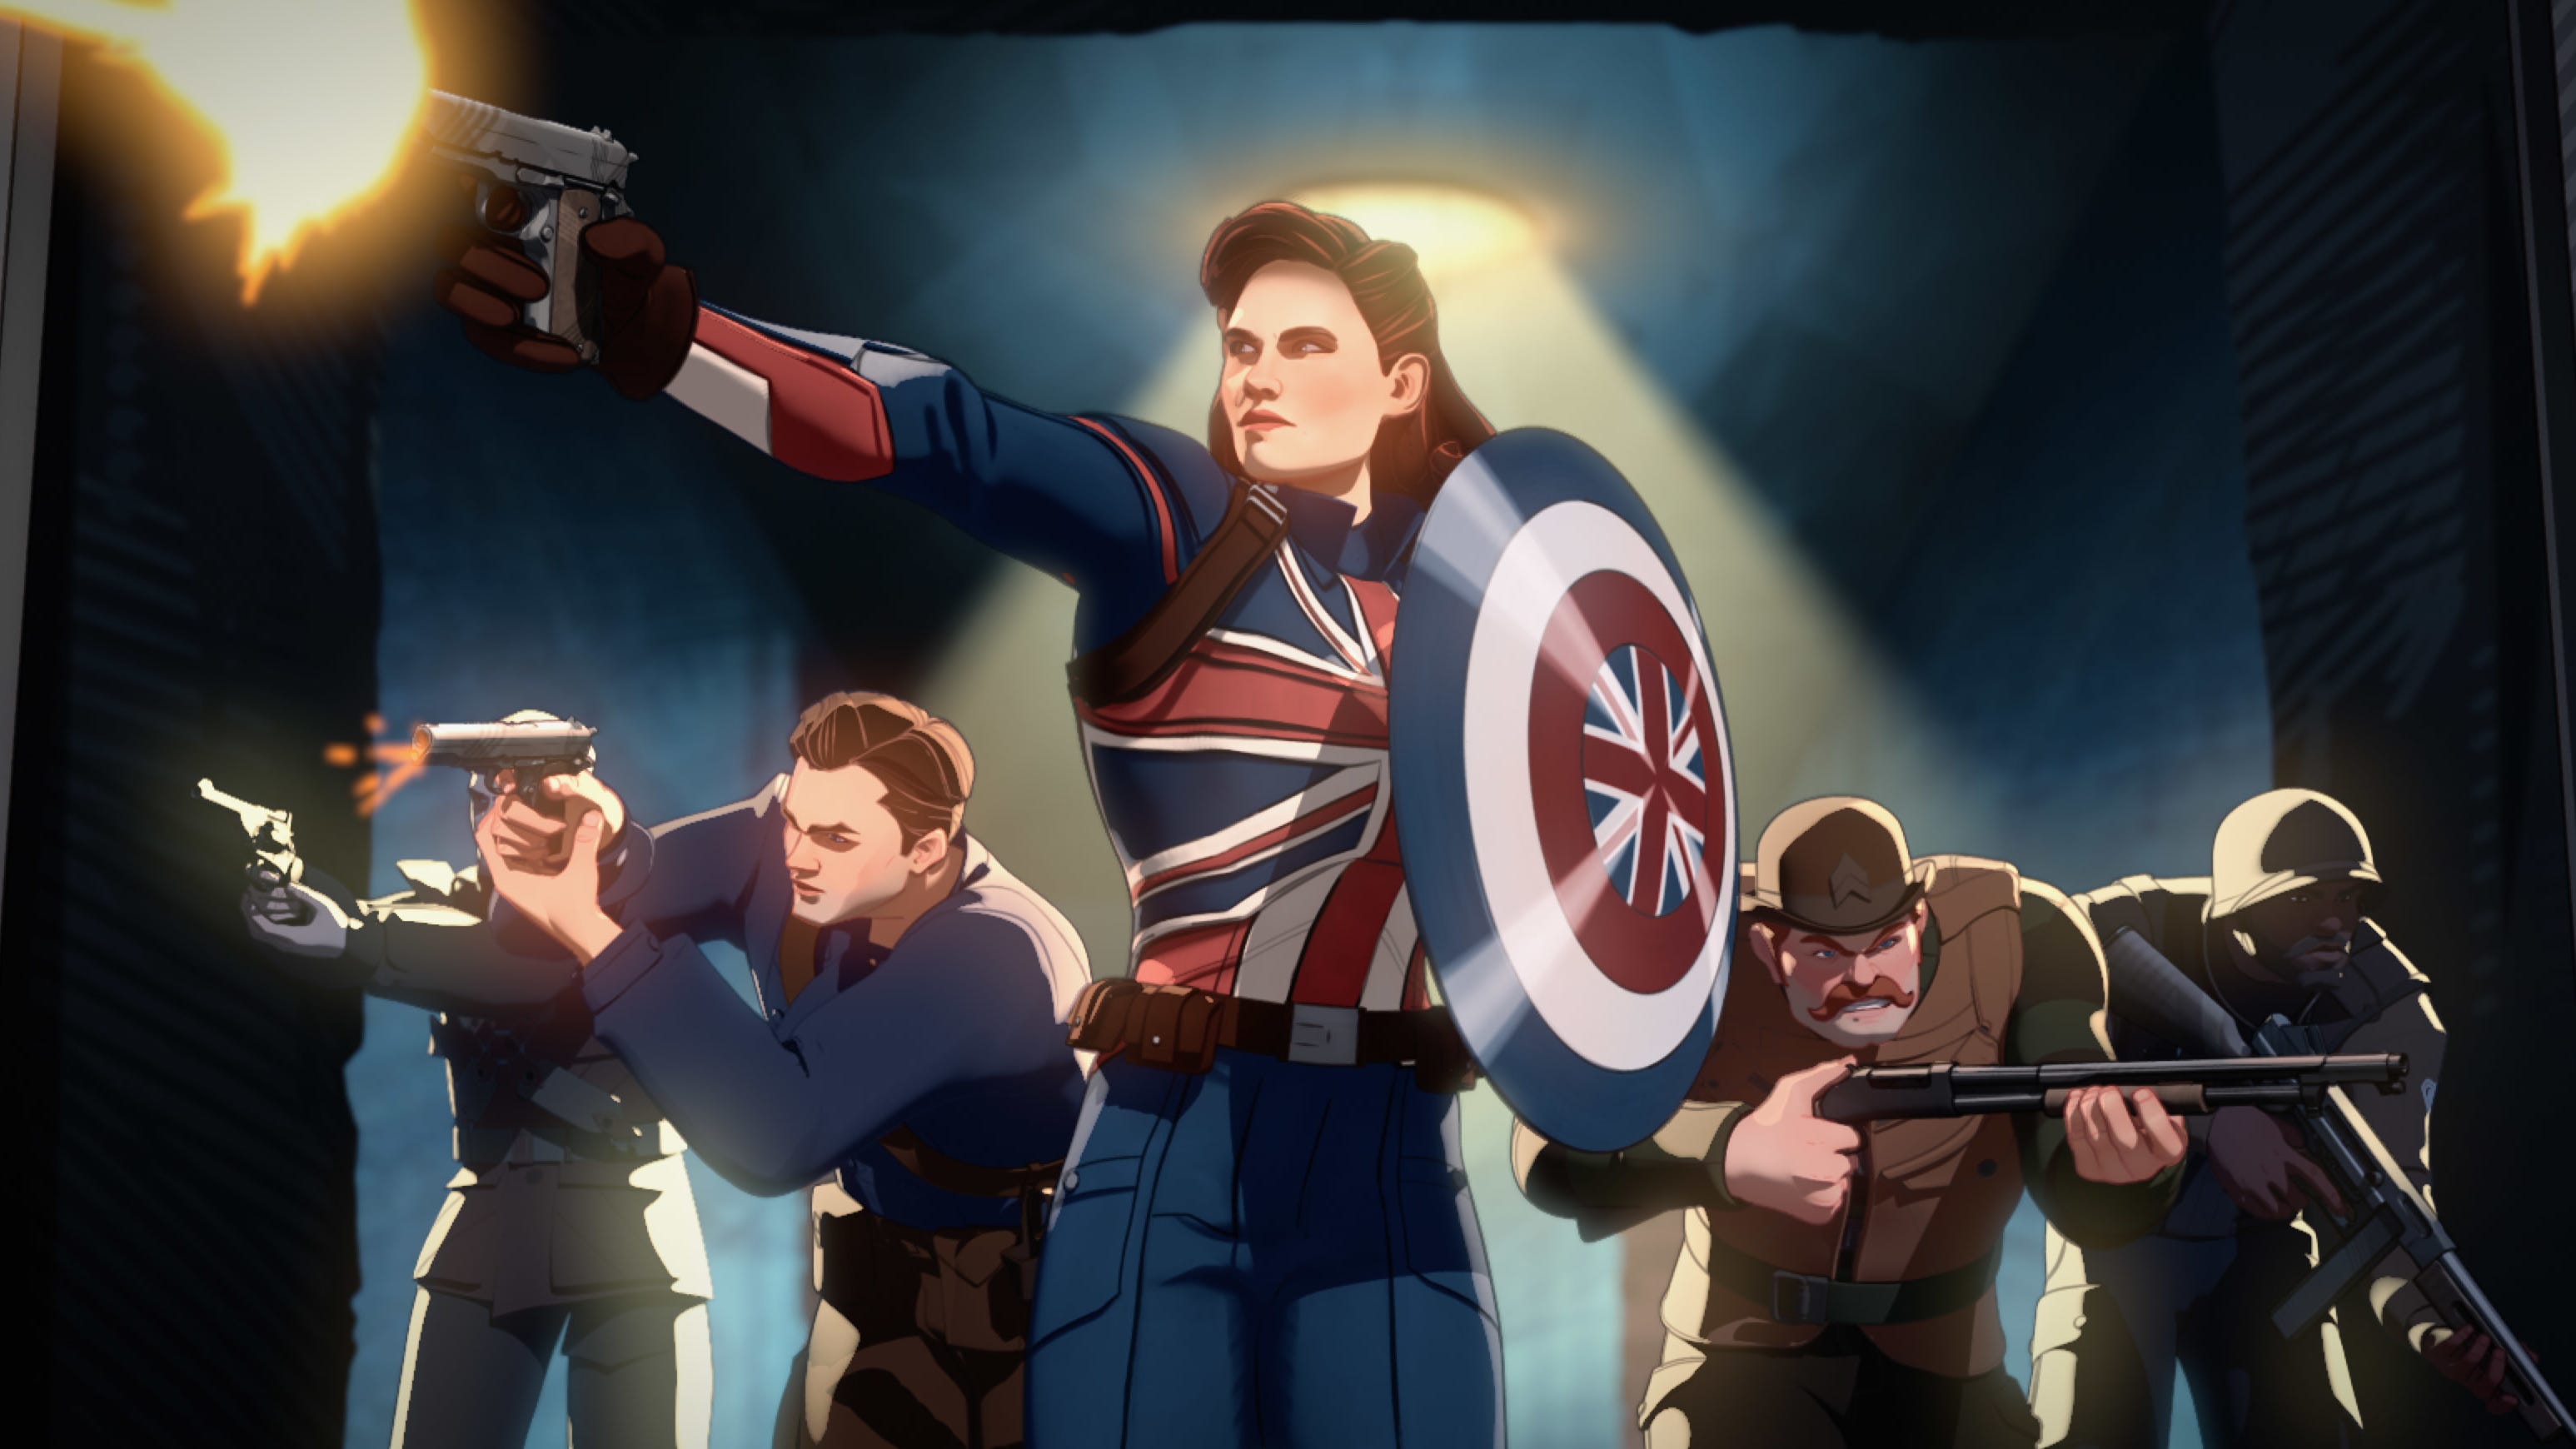 Captain Carter (voiced by Hayley Atwell, center) leads the Howling Commandos into battle in the premiere episode of Marvel's animated "What If...?"